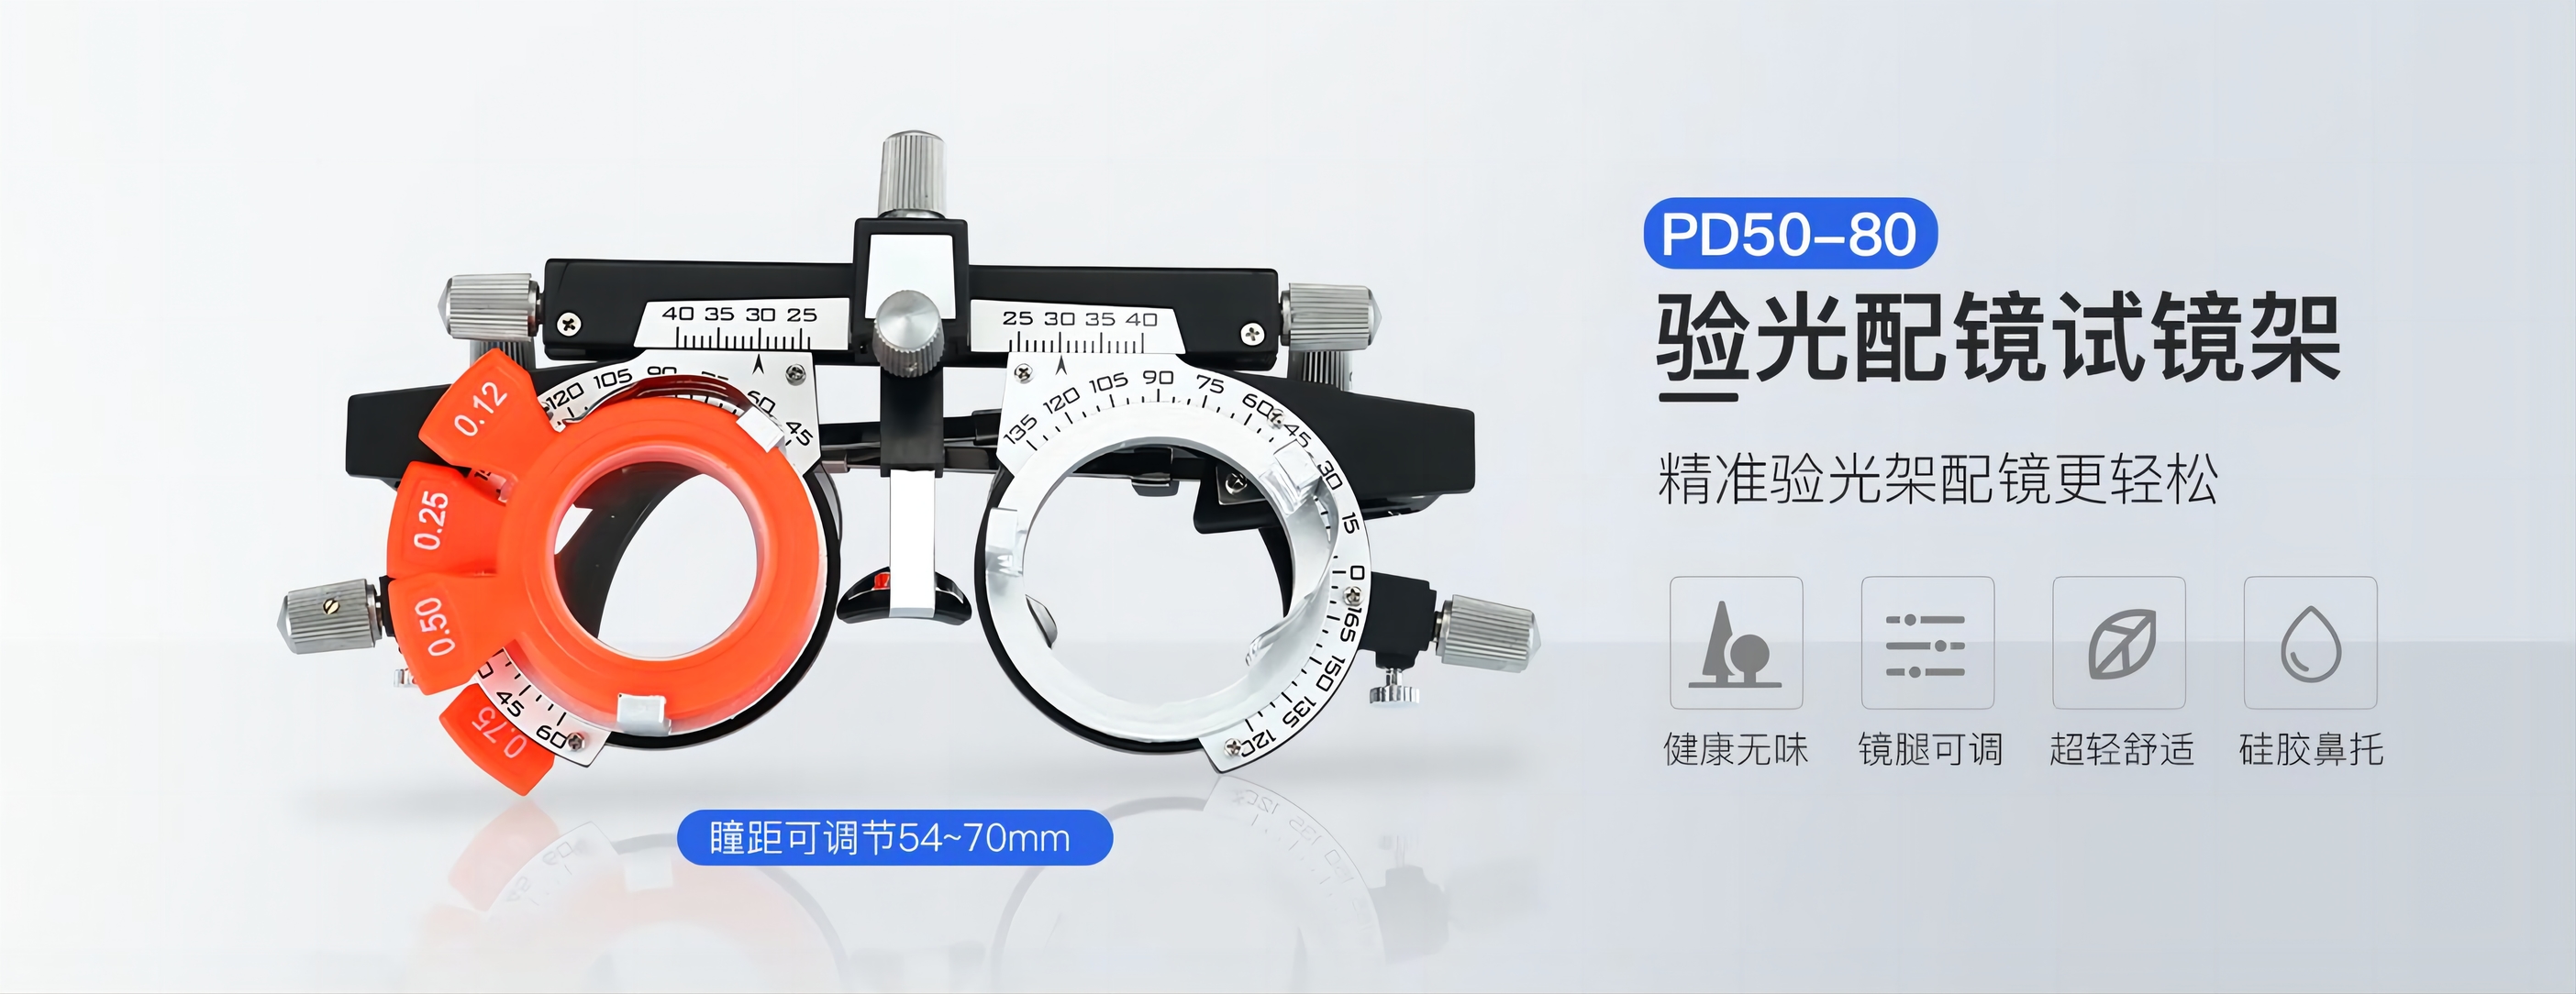 Optometry Equipments, Ophthalmic Equipments, Eyeglass Tools and Spare parts, Medical Equipment, Promotion - RIGHTWAY OPTICAL CO.,LTD